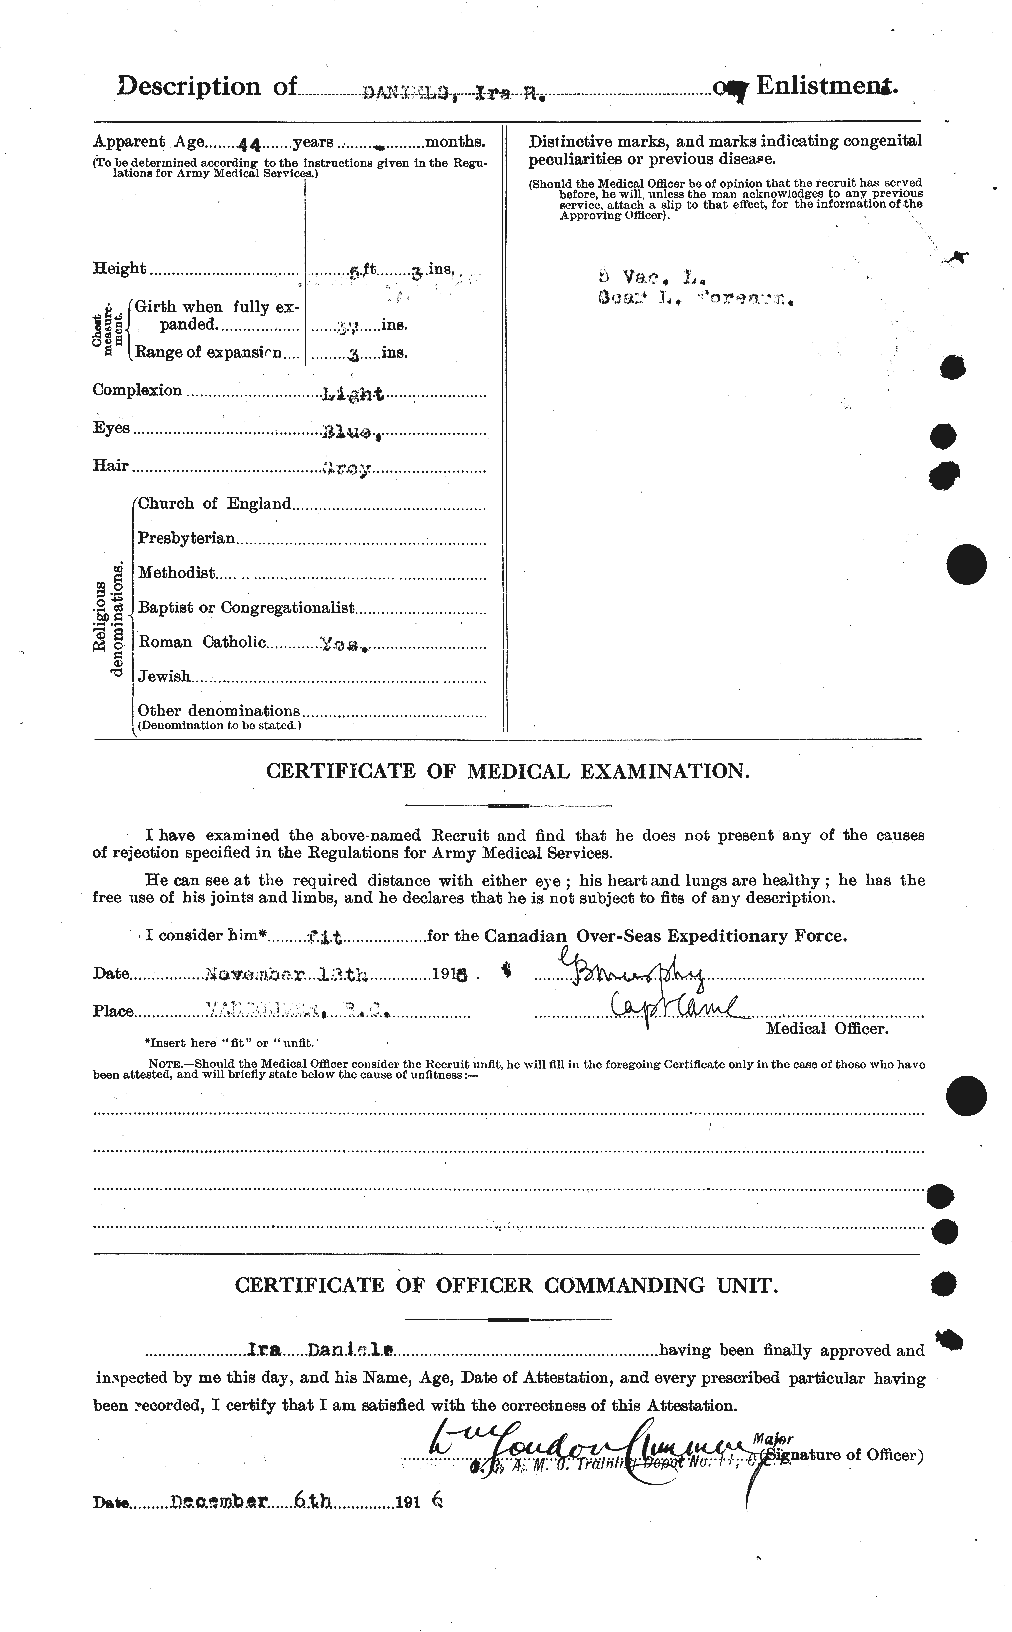 Personnel Records of the First World War - CEF 279623b